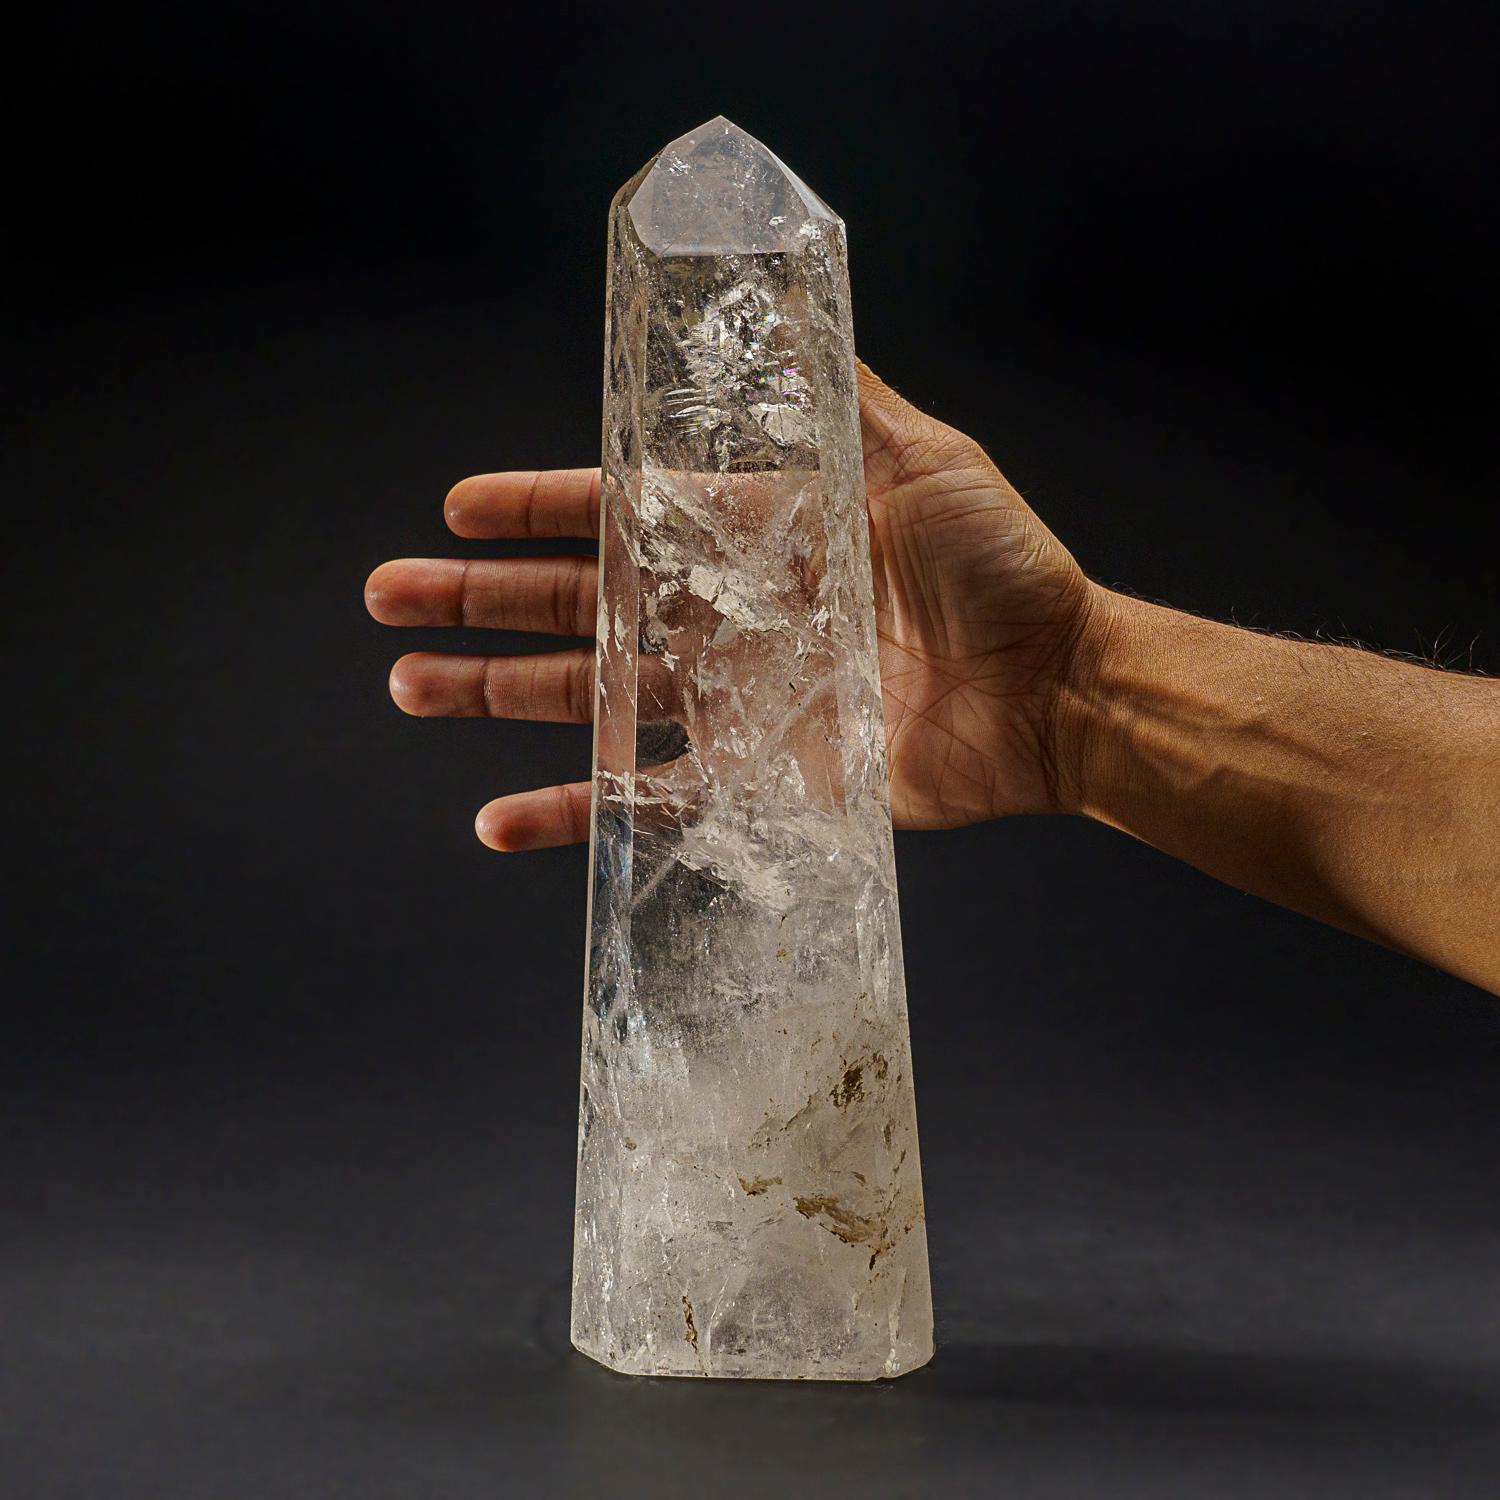 Brazilian Genuine Polished Clear Quartz Point From Brazil (4 lbs) For Sale